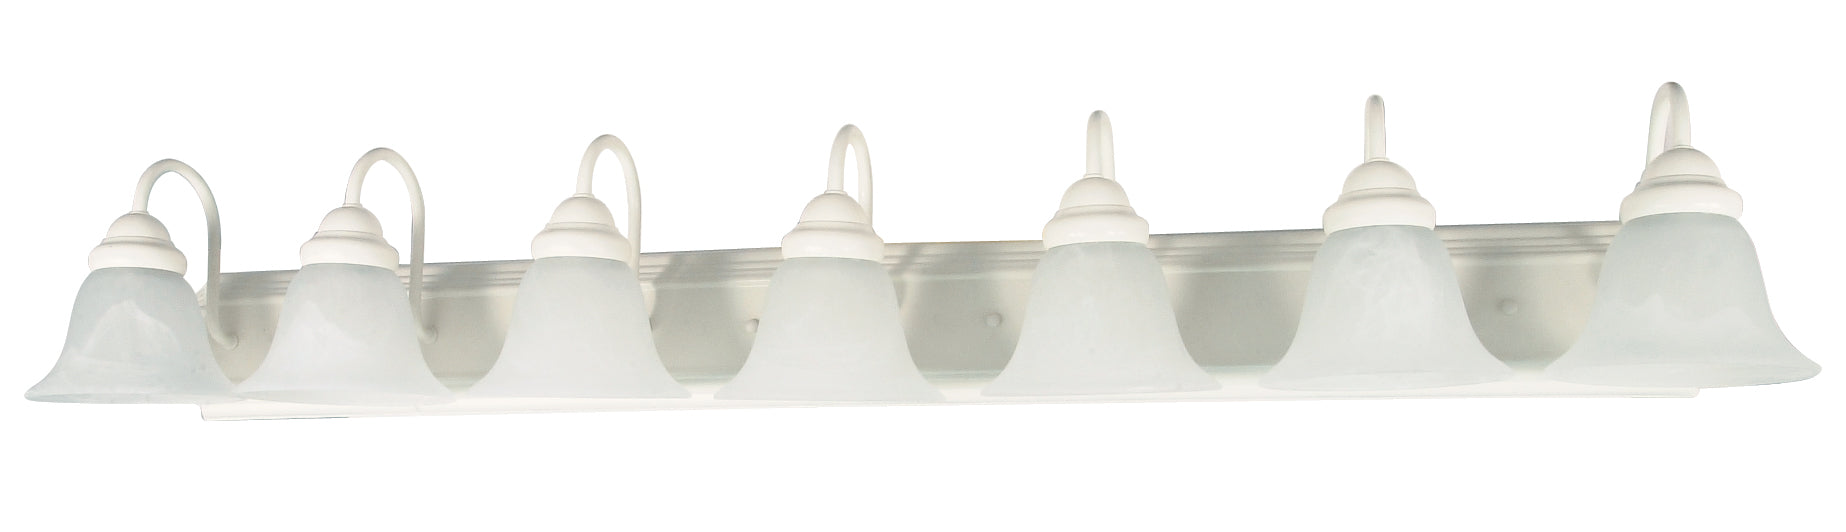 SATCO/NUVO Ballerina 7-Light 48 Inch Vanity With Alabaster Glass Bell Shades (60-294)